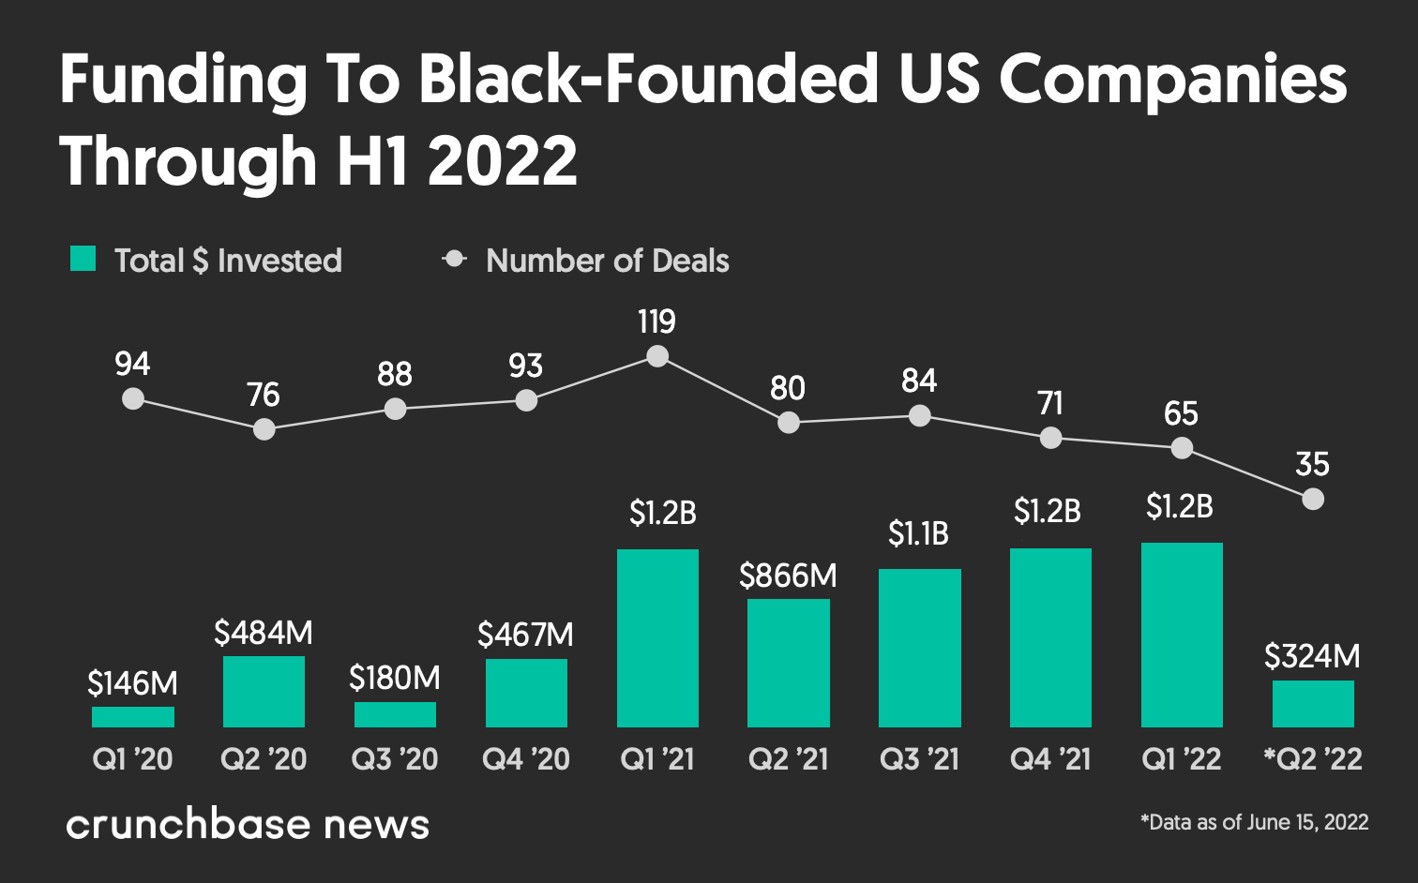 Funding to Black-Founded US Companies